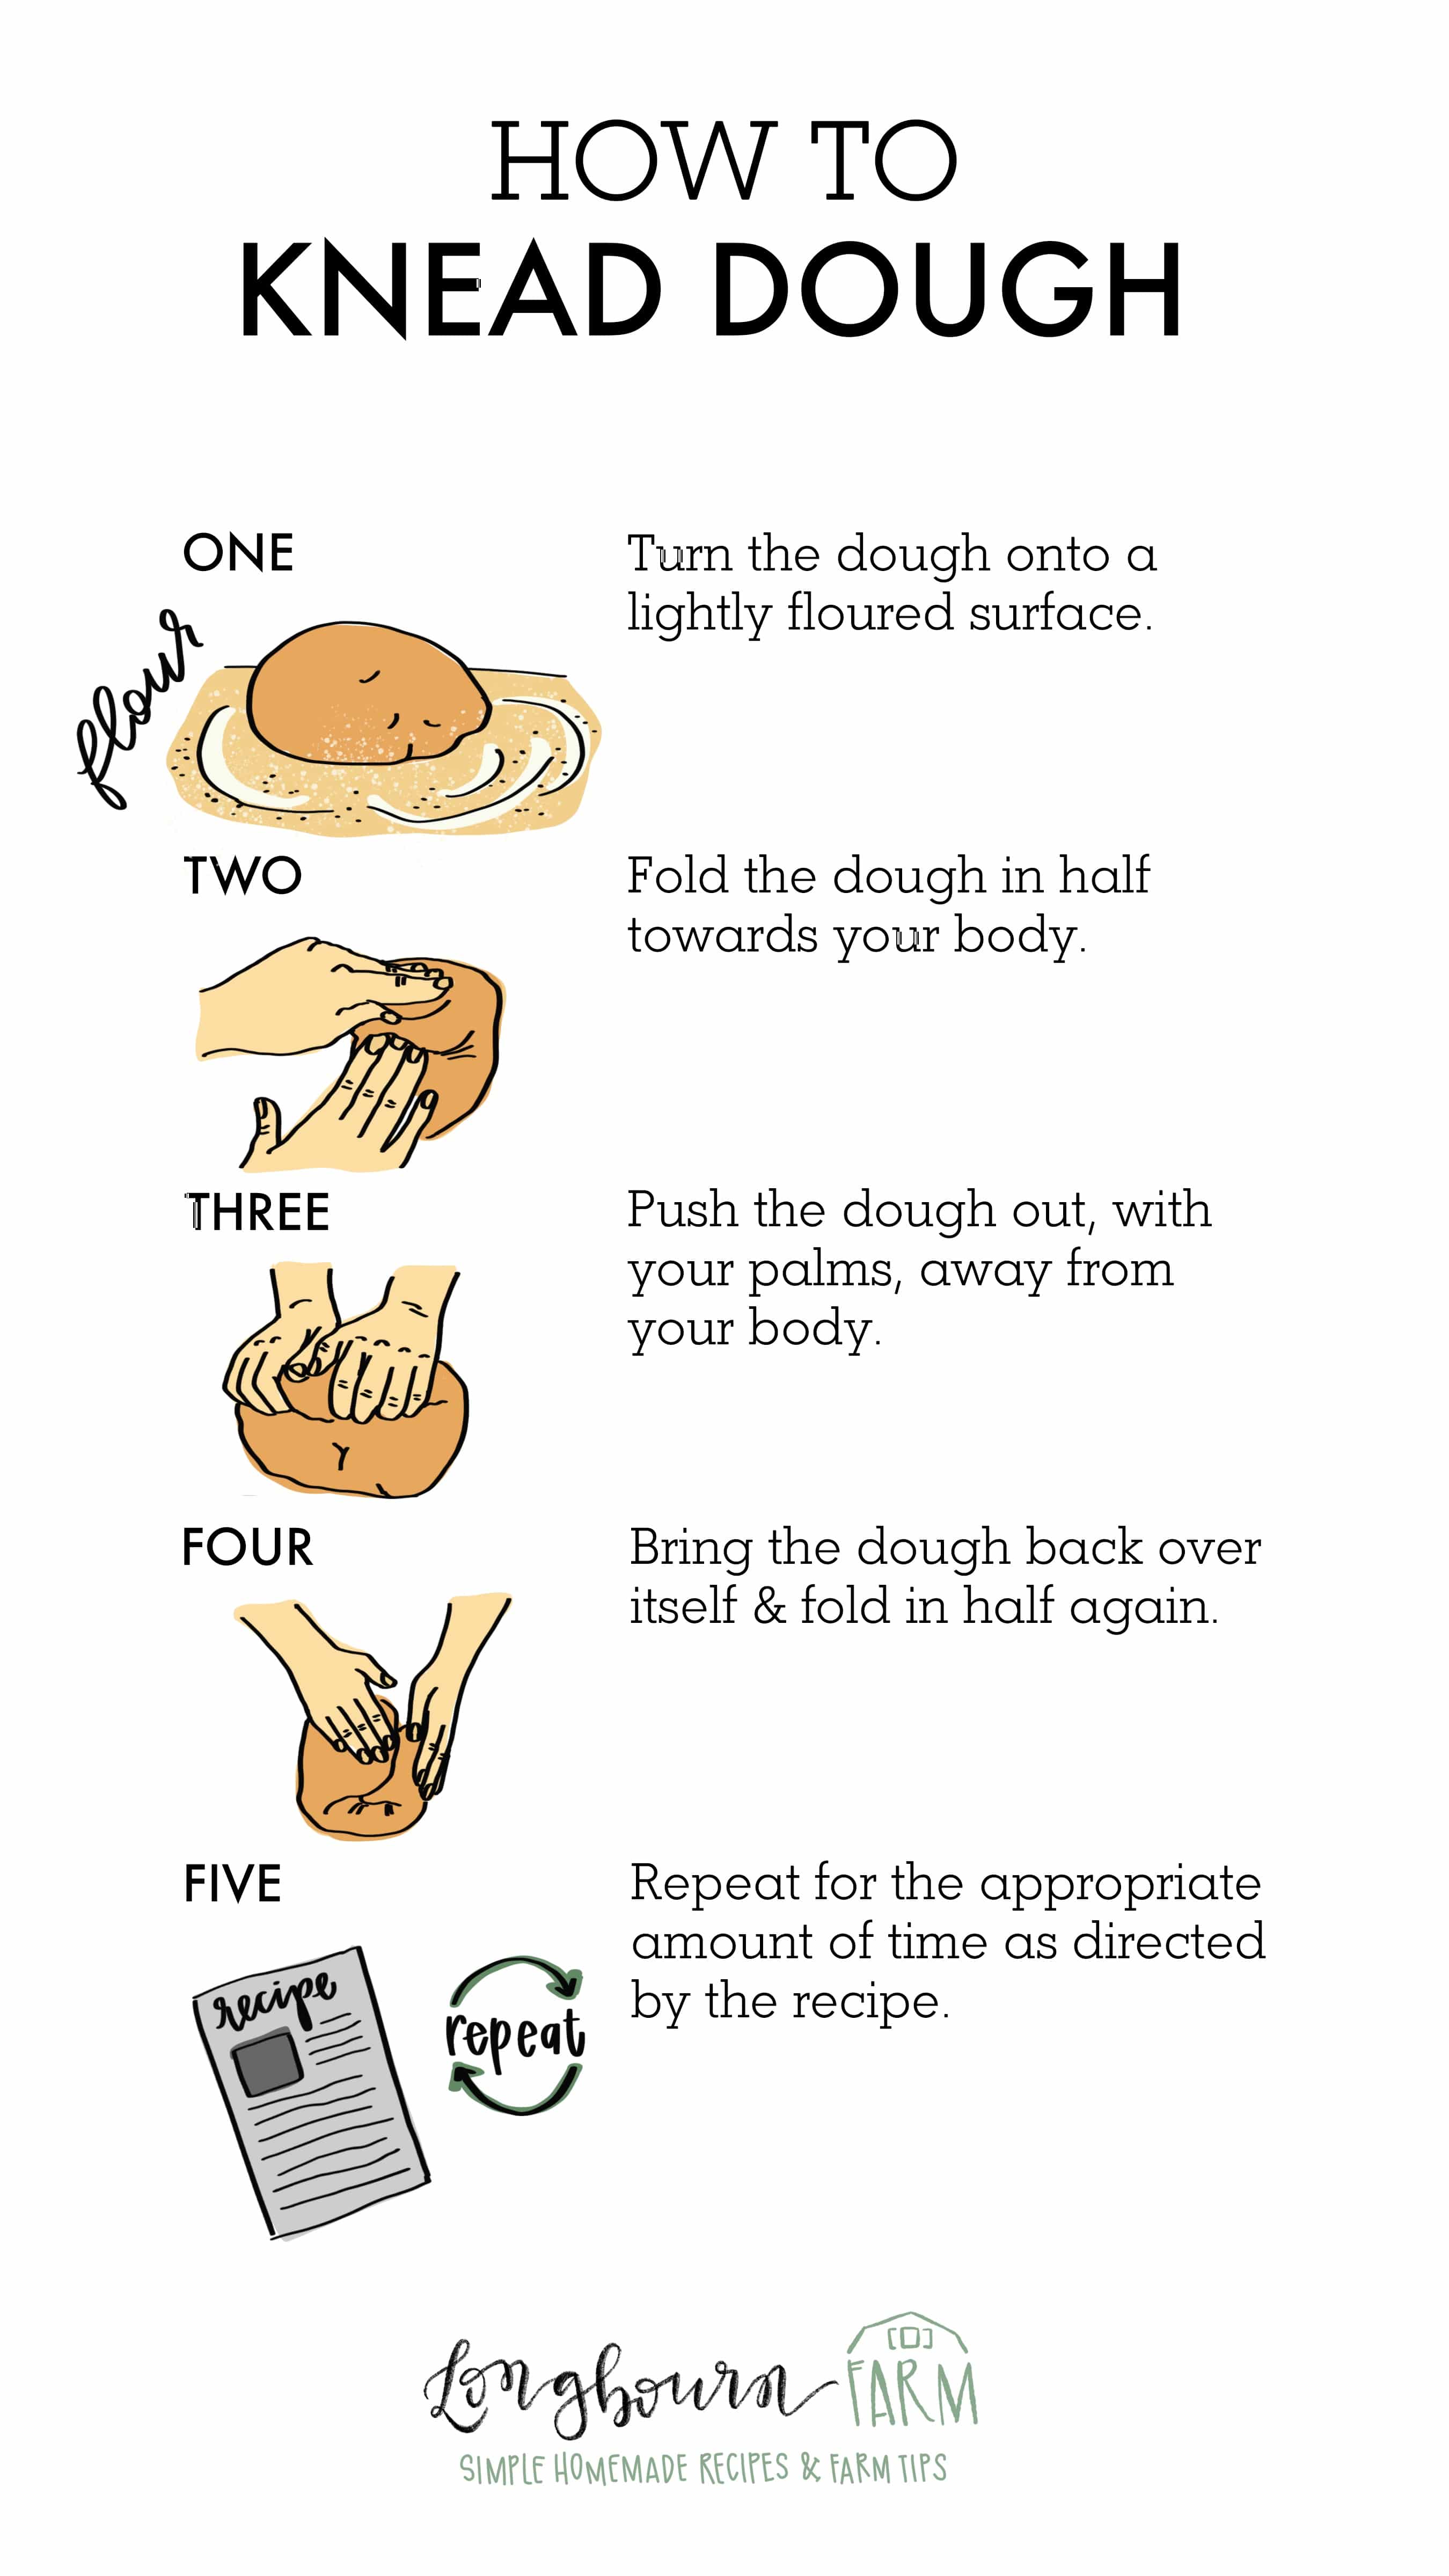 Kneading dough is easy if you know the right technique! Learn all the basics you need to get a fresh loaf on your table with ease. #dough #kneaddough #howtokneaddough #bread #bakingbread #howtobakebread #howtomakebread #kneadingdough #kneadbreaddough #wheatbread #whitebread #dinnerrolls